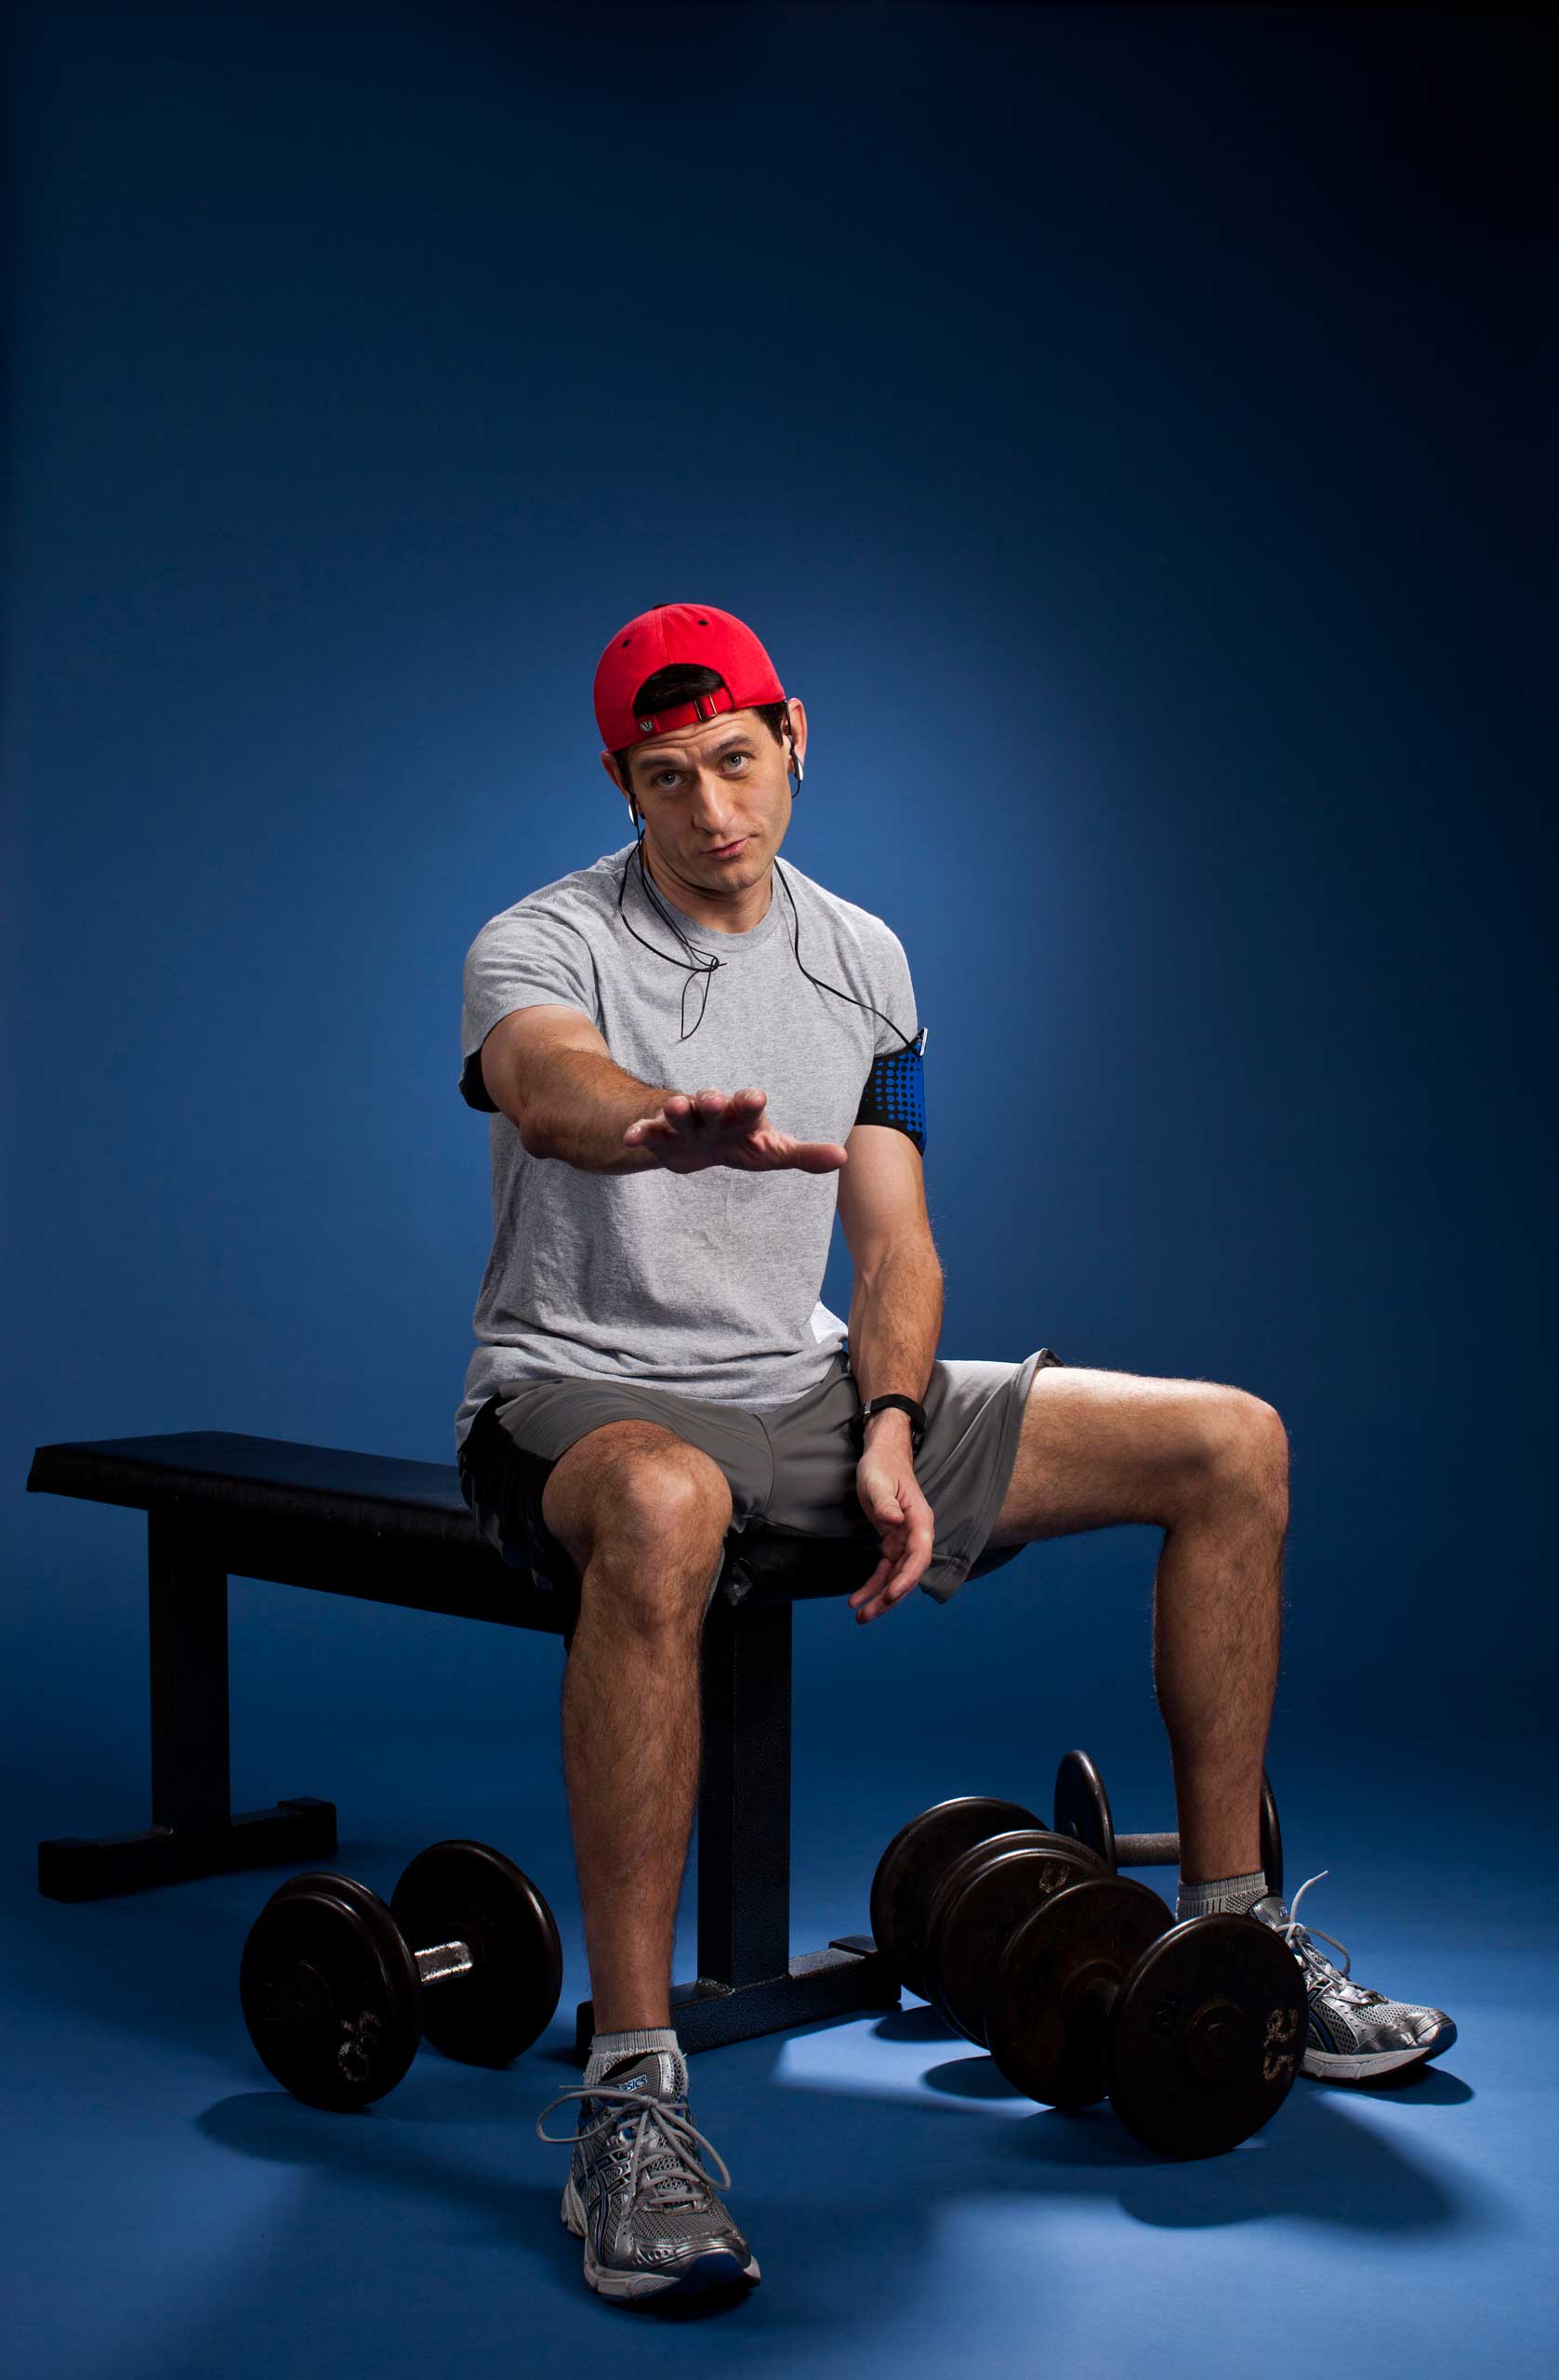 According to Tony Horton, you don't need a lot of equipment to get fit. Paul Ryan likes to use weights, but they aren't a necessity